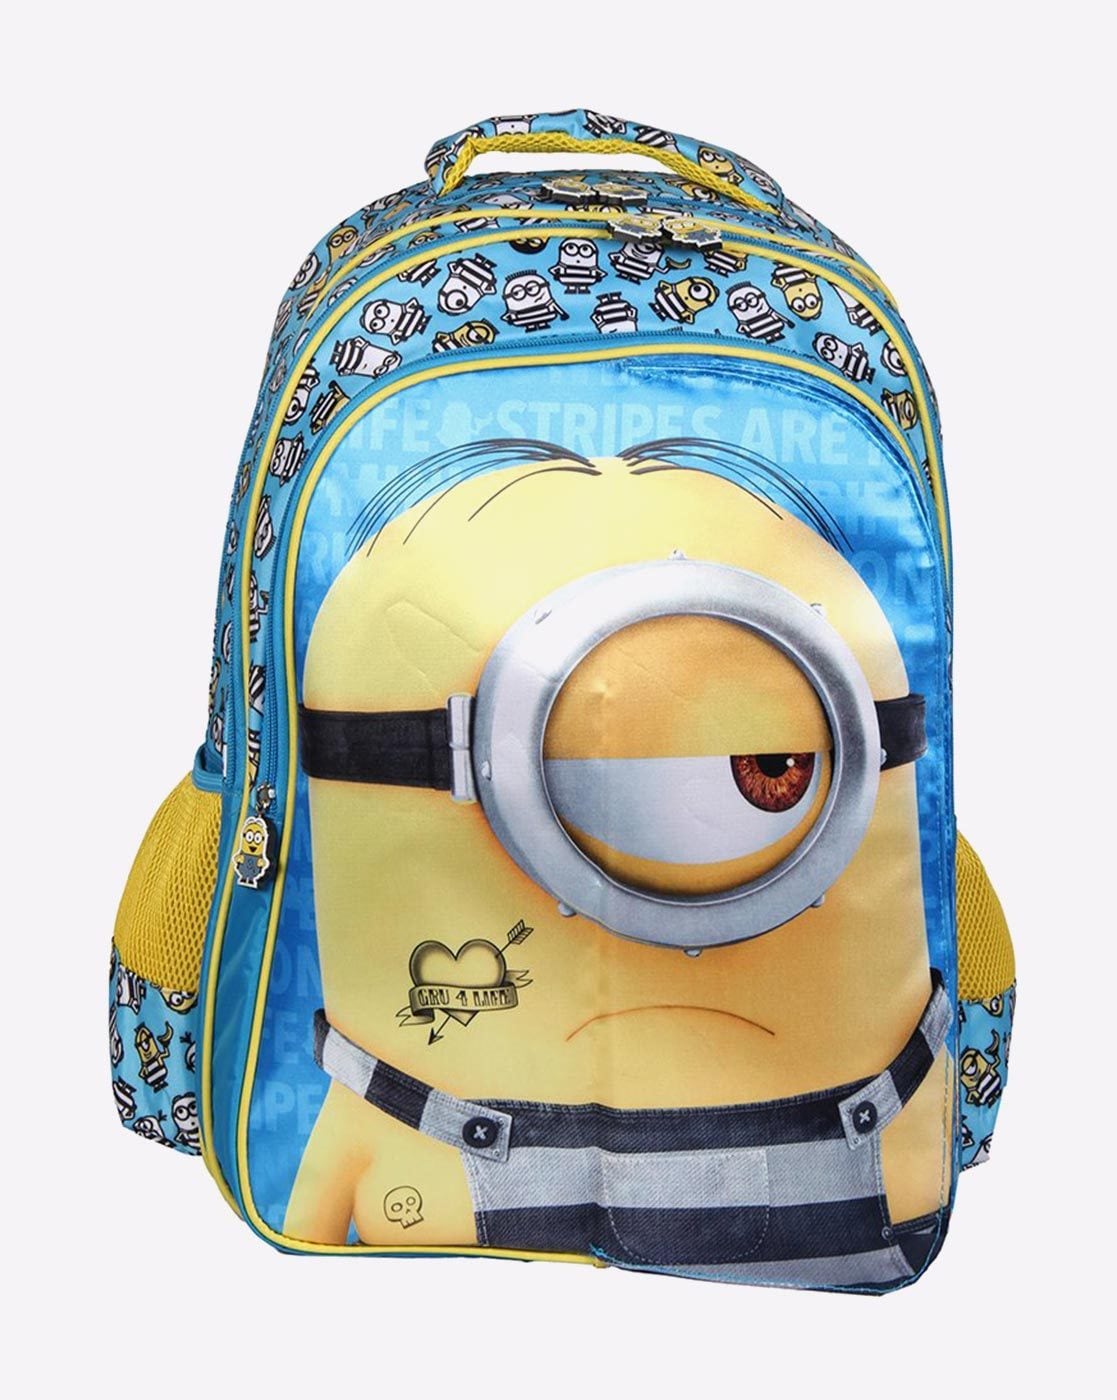 Minion bag pack from smiggle